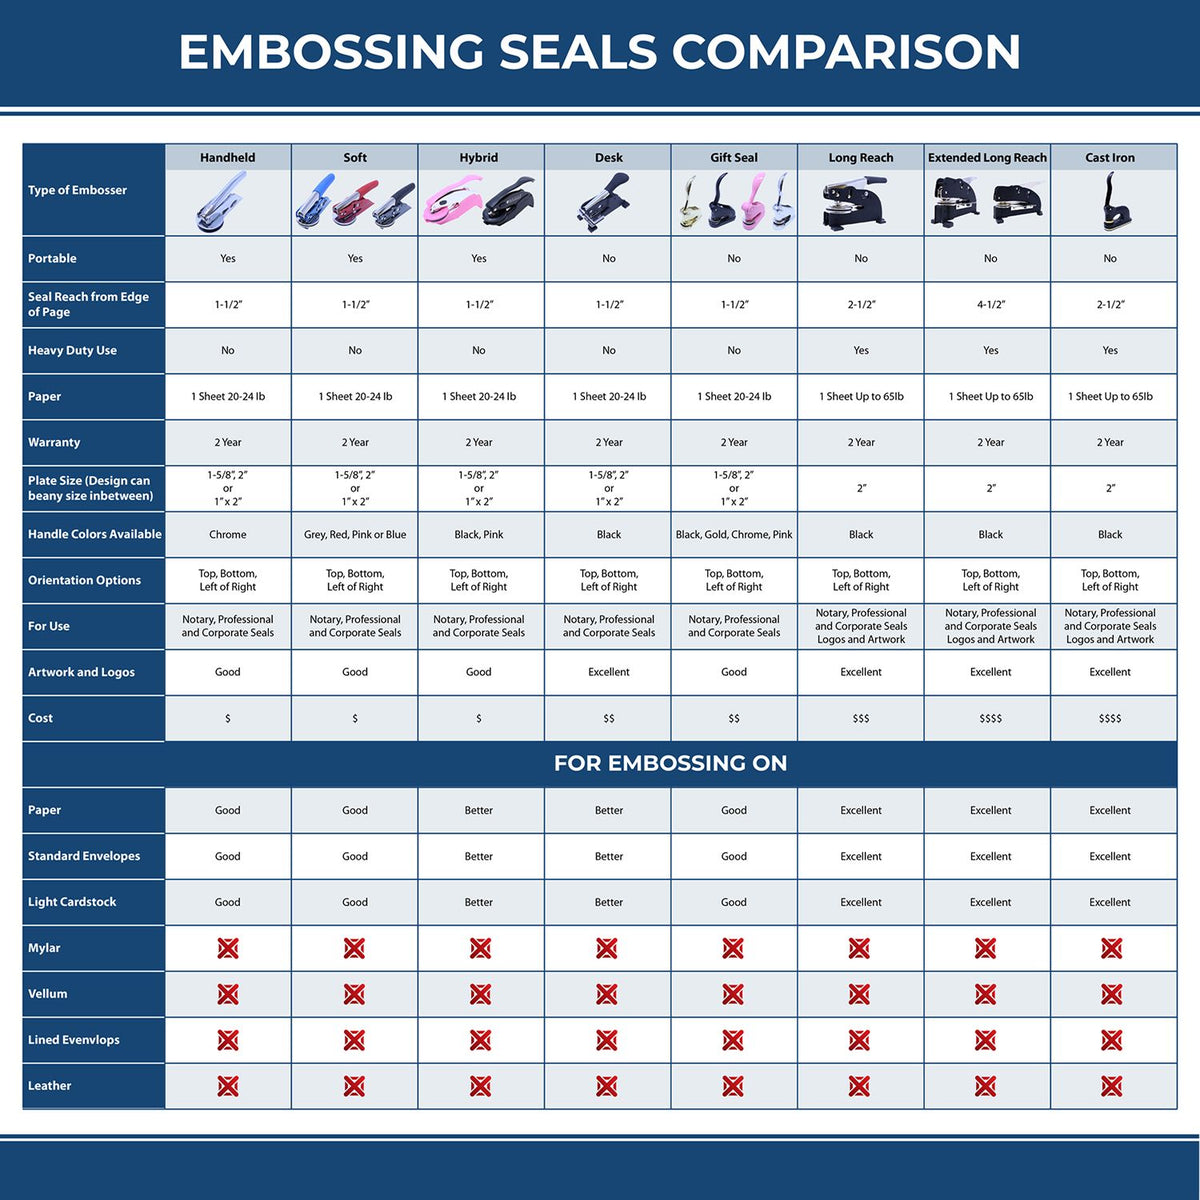 A comparison chart for the different types of mount models available for the Long Reach Indiana PE Seal.